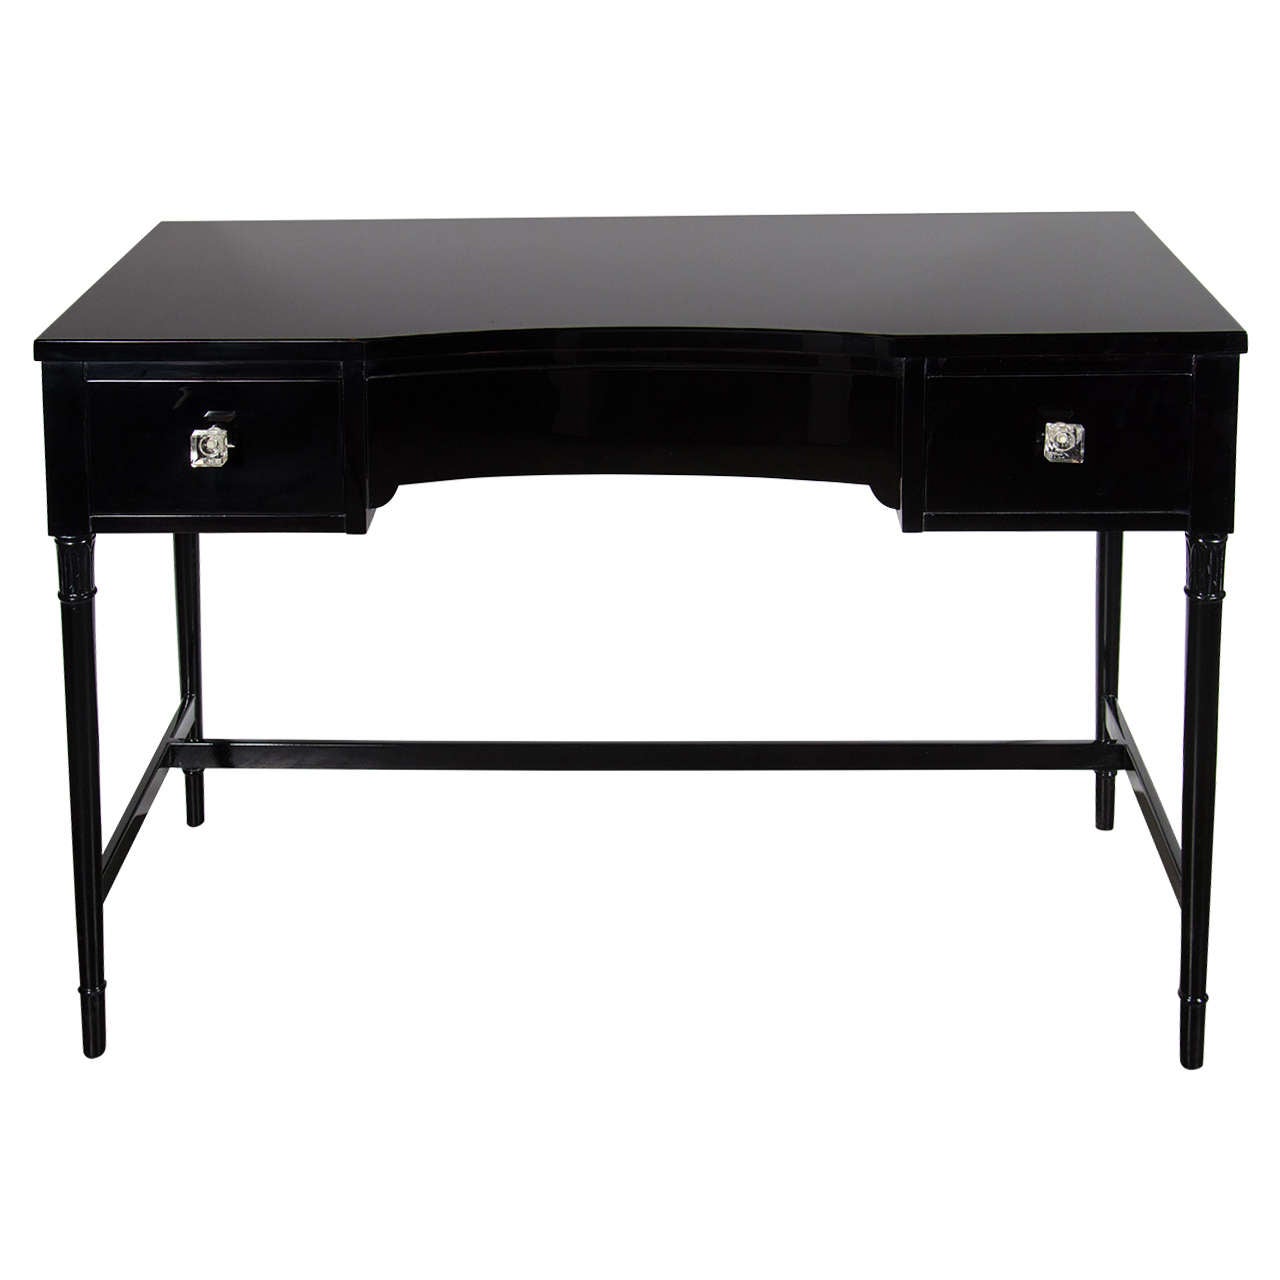 Art Deco Black Lacquer Desk with Square Crystal Pulls by Grosfeld House